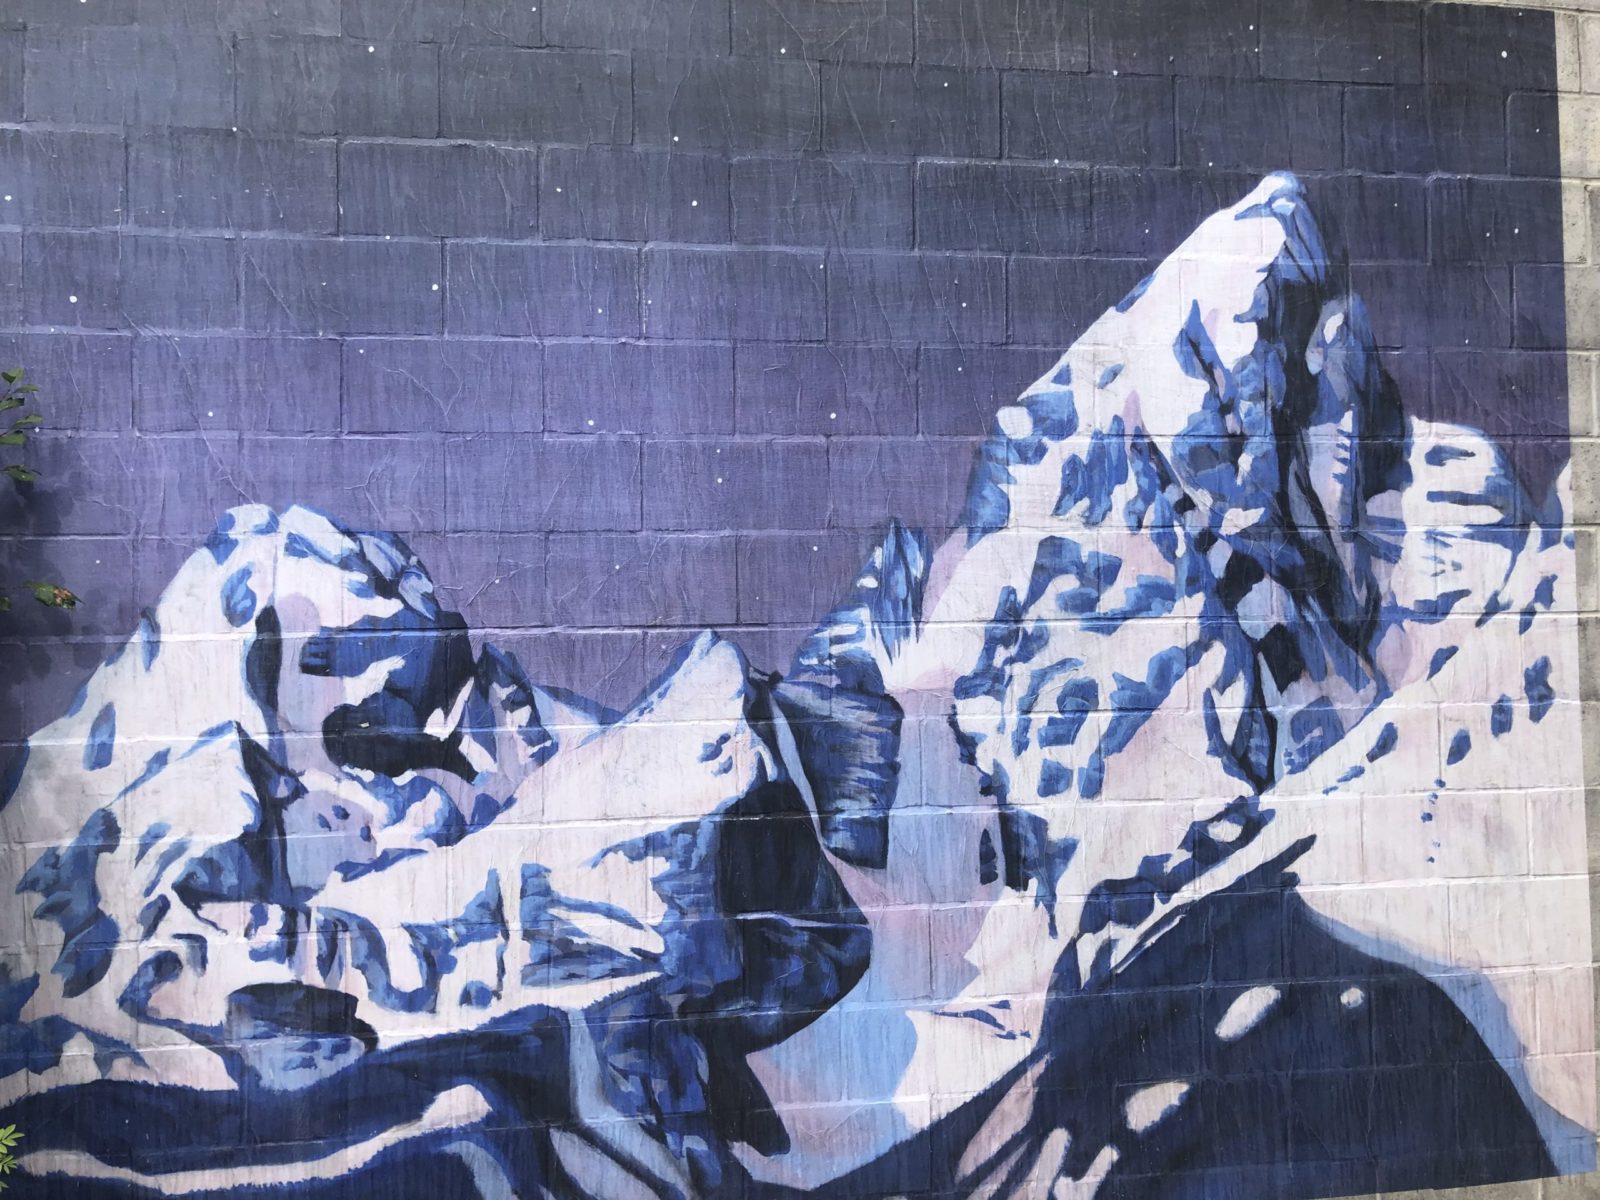 Natalie Connel's glacier mural is located on the east side of the Kismet Rugs building near the corner of Broadway and Willow Street.